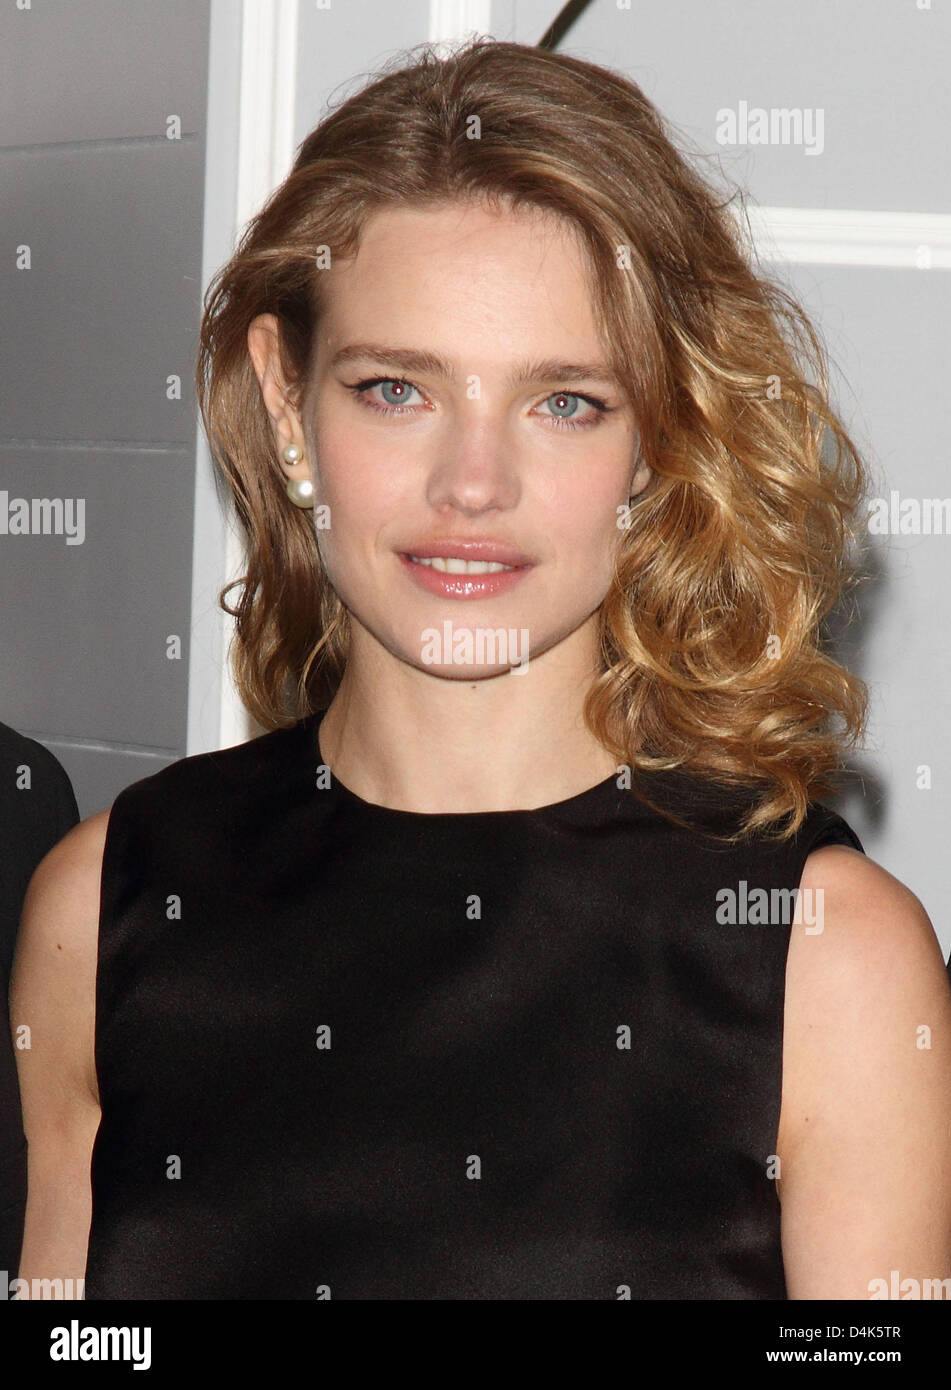 London, UK. 14th March 2013. Natalia Vodianova at a photocall to launch Dior at Harrods, at the Harrods Georgian Restaurant, Knightsbridge, London - March 14th 2013  Photo by Keith Mayhew/Alamy Live News Stock Photo